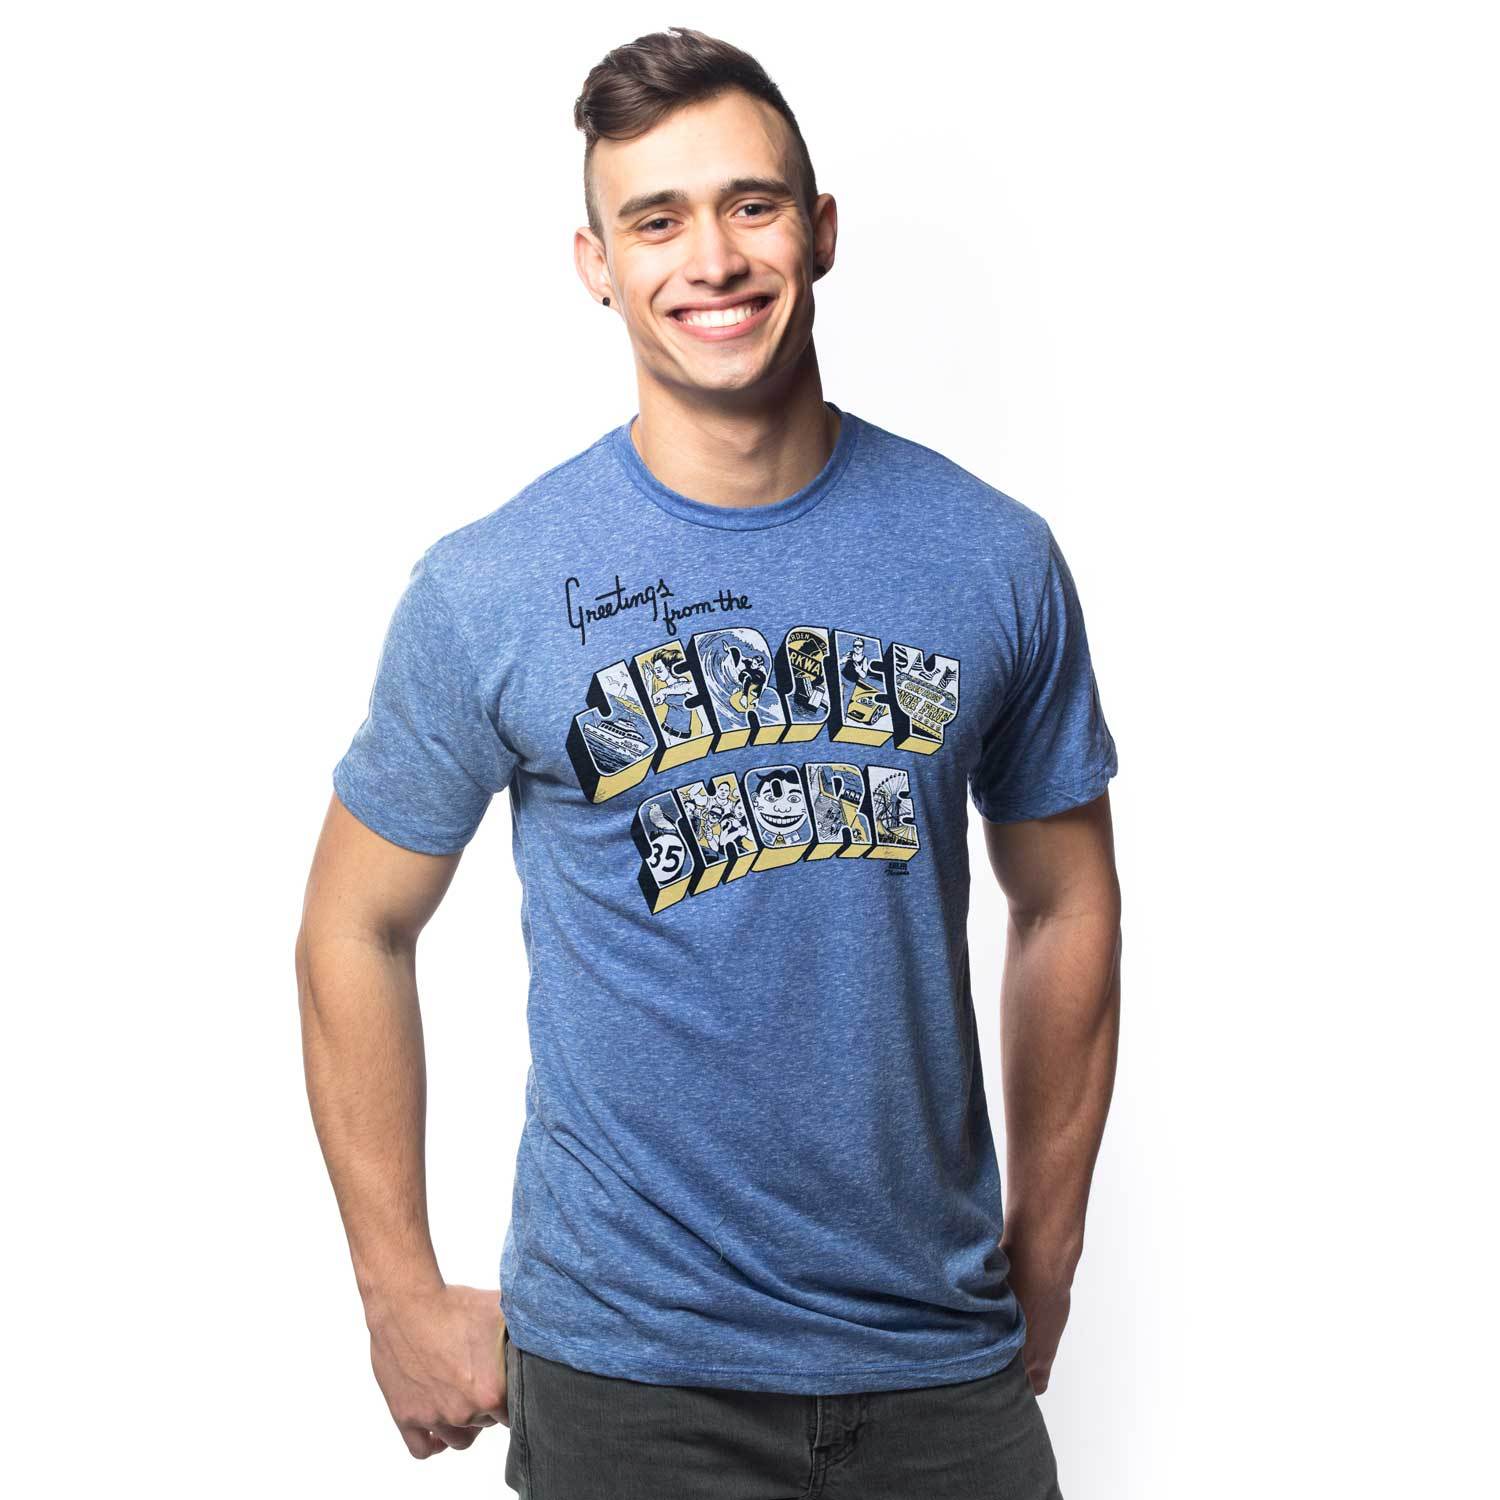 Solid Threads Men's Captain Clutch Vintage Inspired T-Shirt with Retro, Derek Jeter Graphic Navy / Large